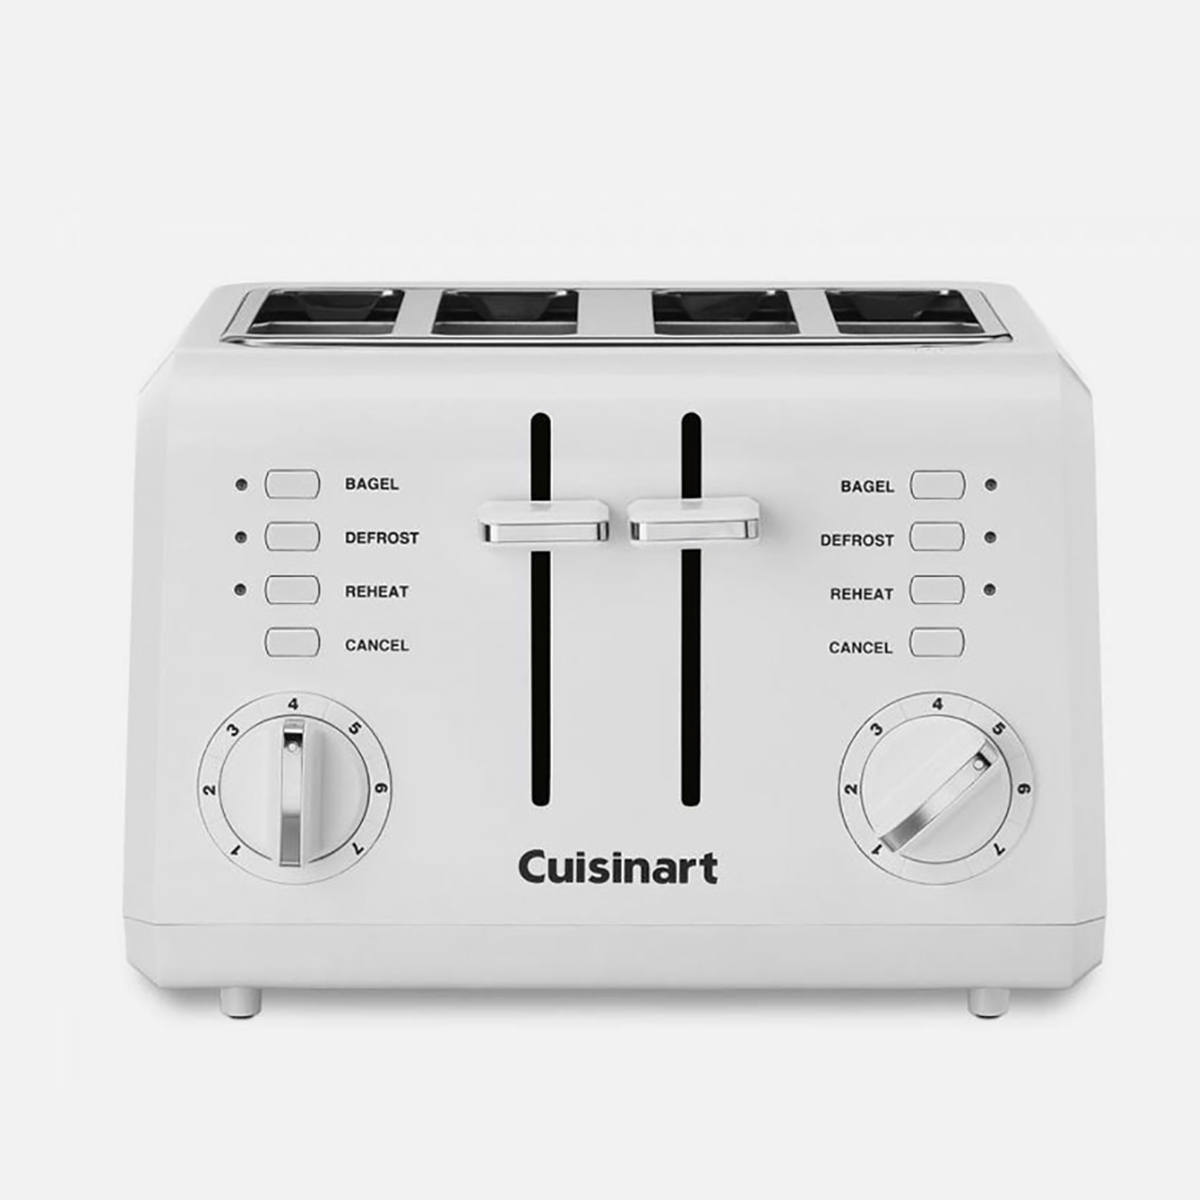 Cuisinart(R) Compact 4-Slice Toaster